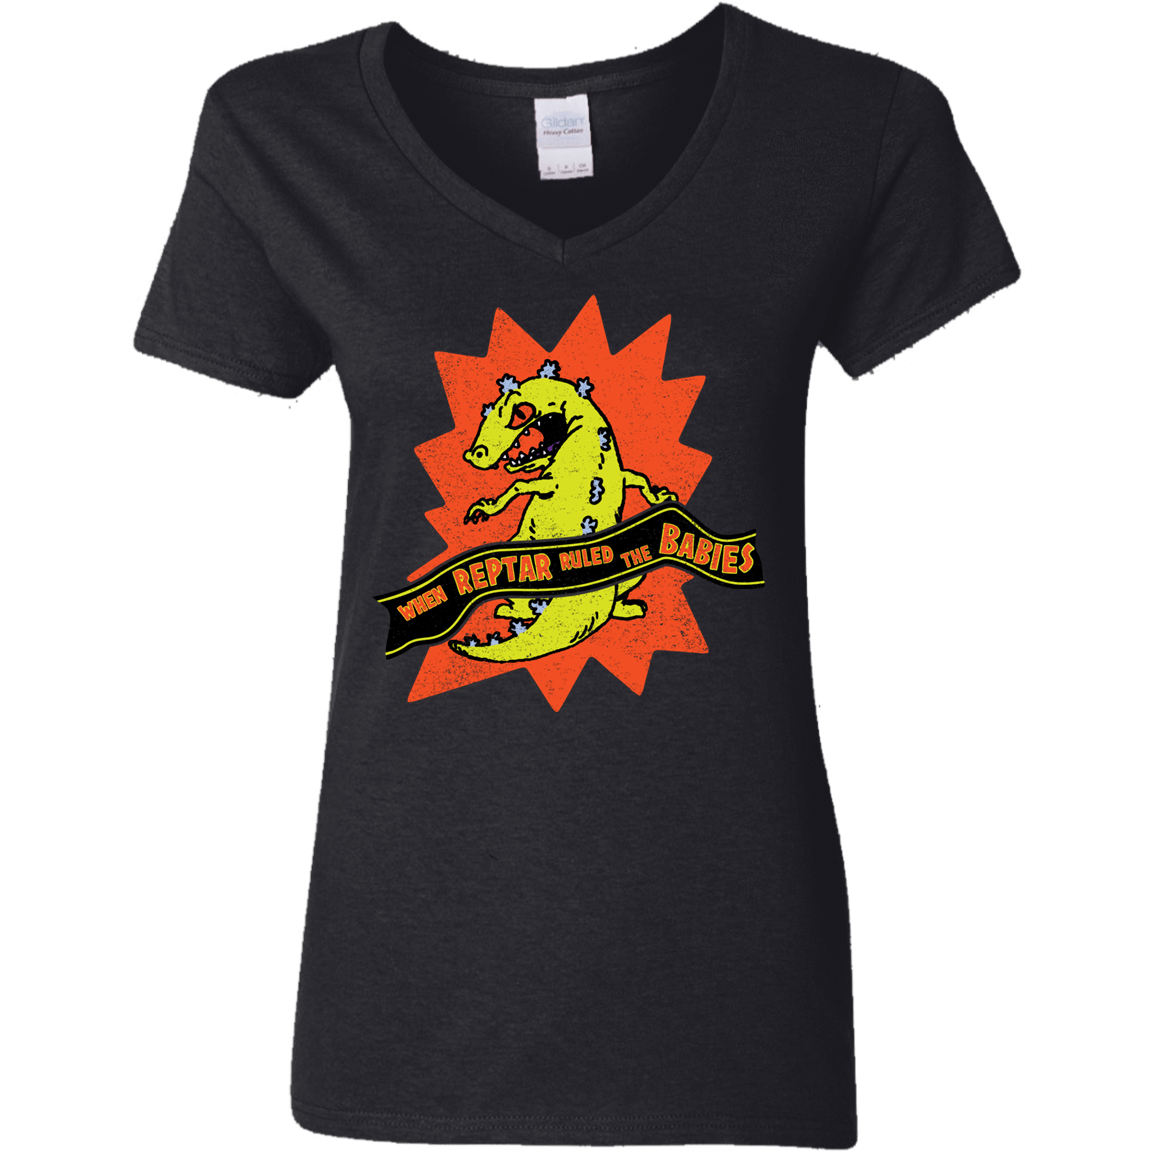 T-Shirts Black / S When Reptar Ruled The Babies Women's V-Neck T-Shirt